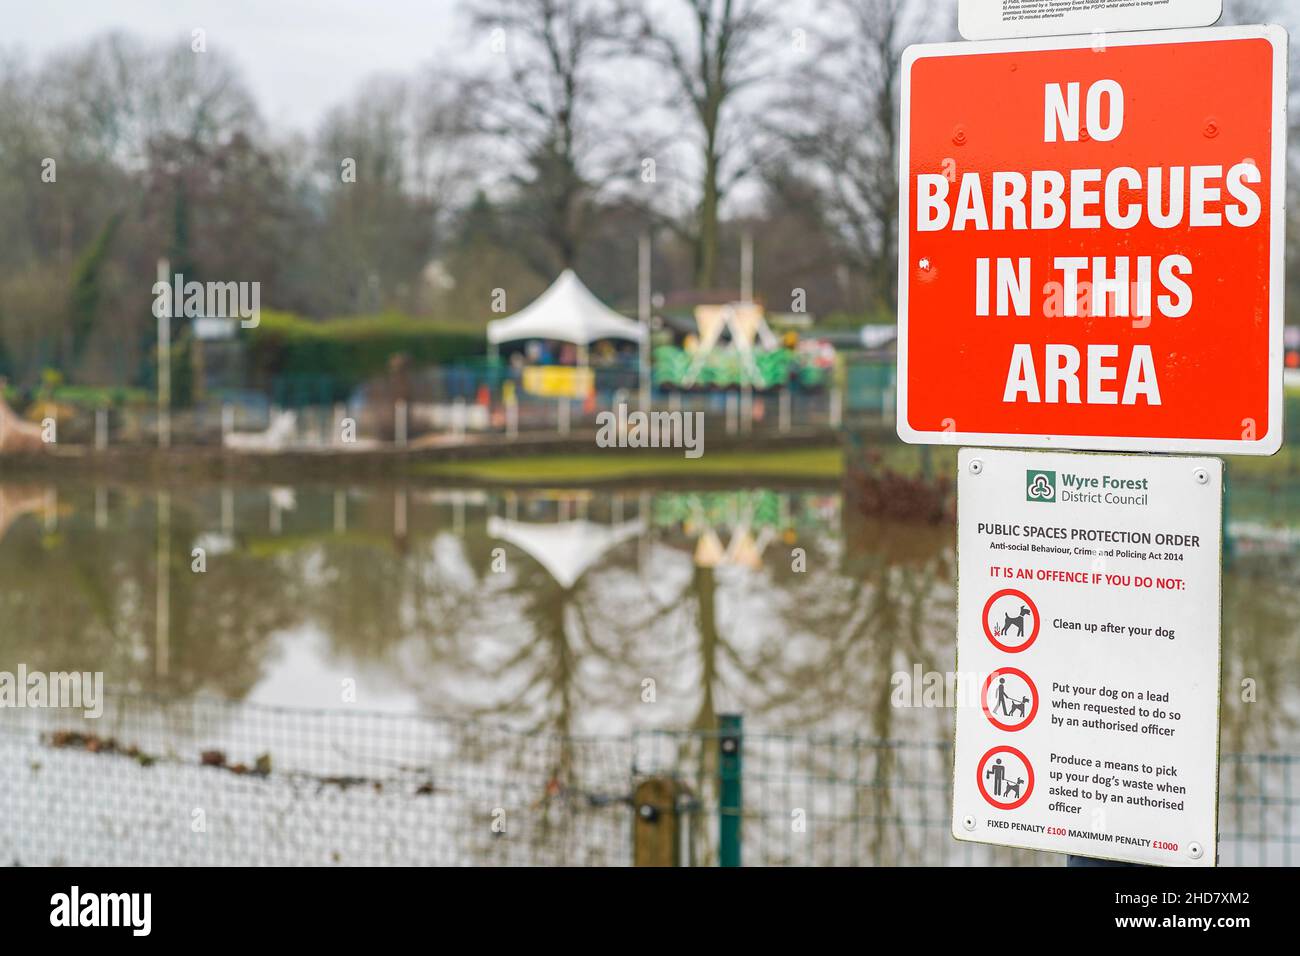 'No Barbecues in this area' sign overlooking the flooded public park in Stourport-on-Severn, Worcestershire, UK, due to River Severn flooding. Stock Photo